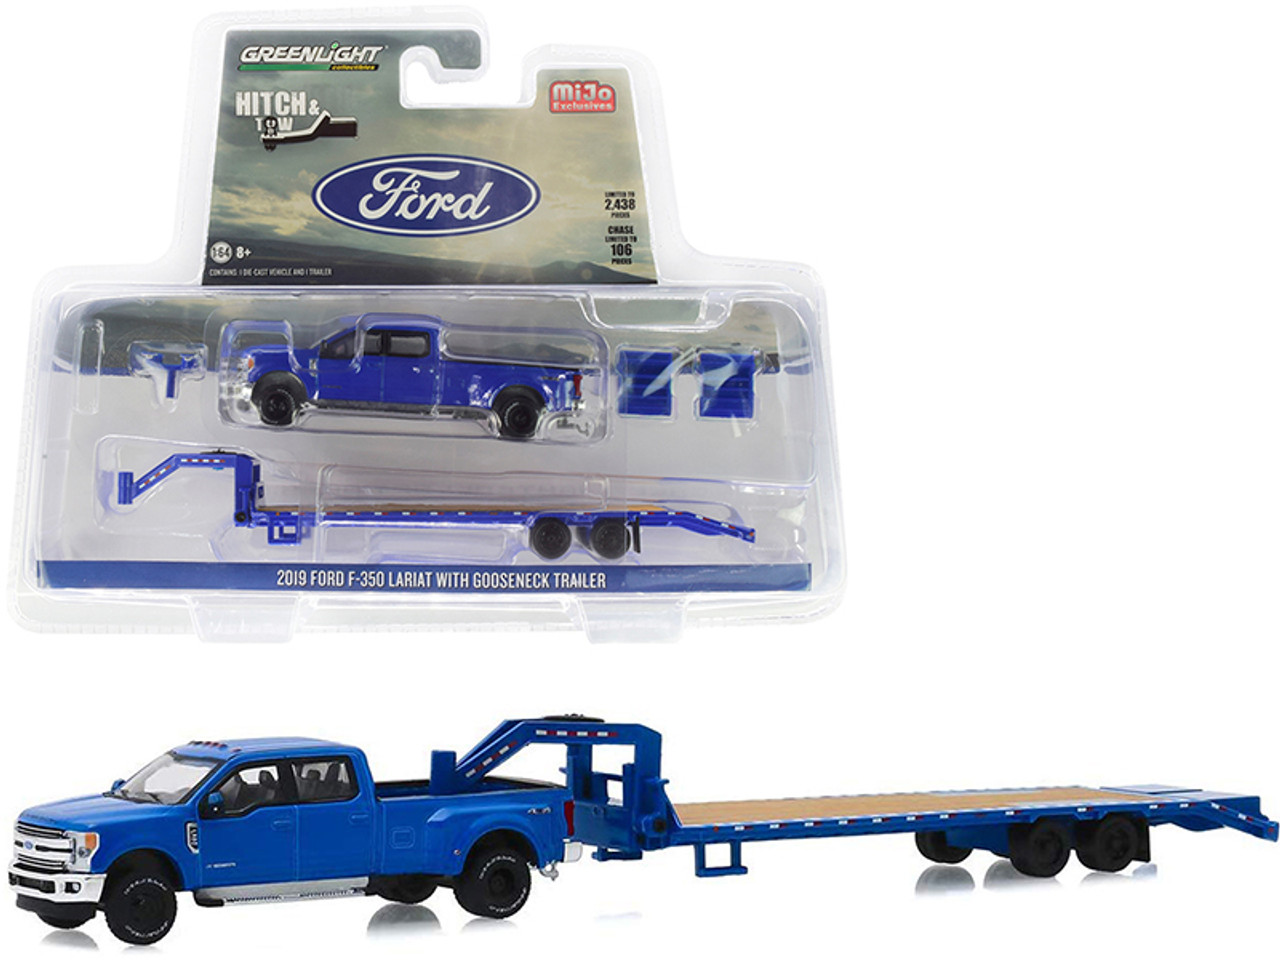 2019 Ford F-350 Lariat Pickup Truck with Gooseneck Trailer Blue "Hitch & Tow" Series Limited Edition to 2,438 pieces Worldwide 1/64 Diecast Model Car by Greenlight